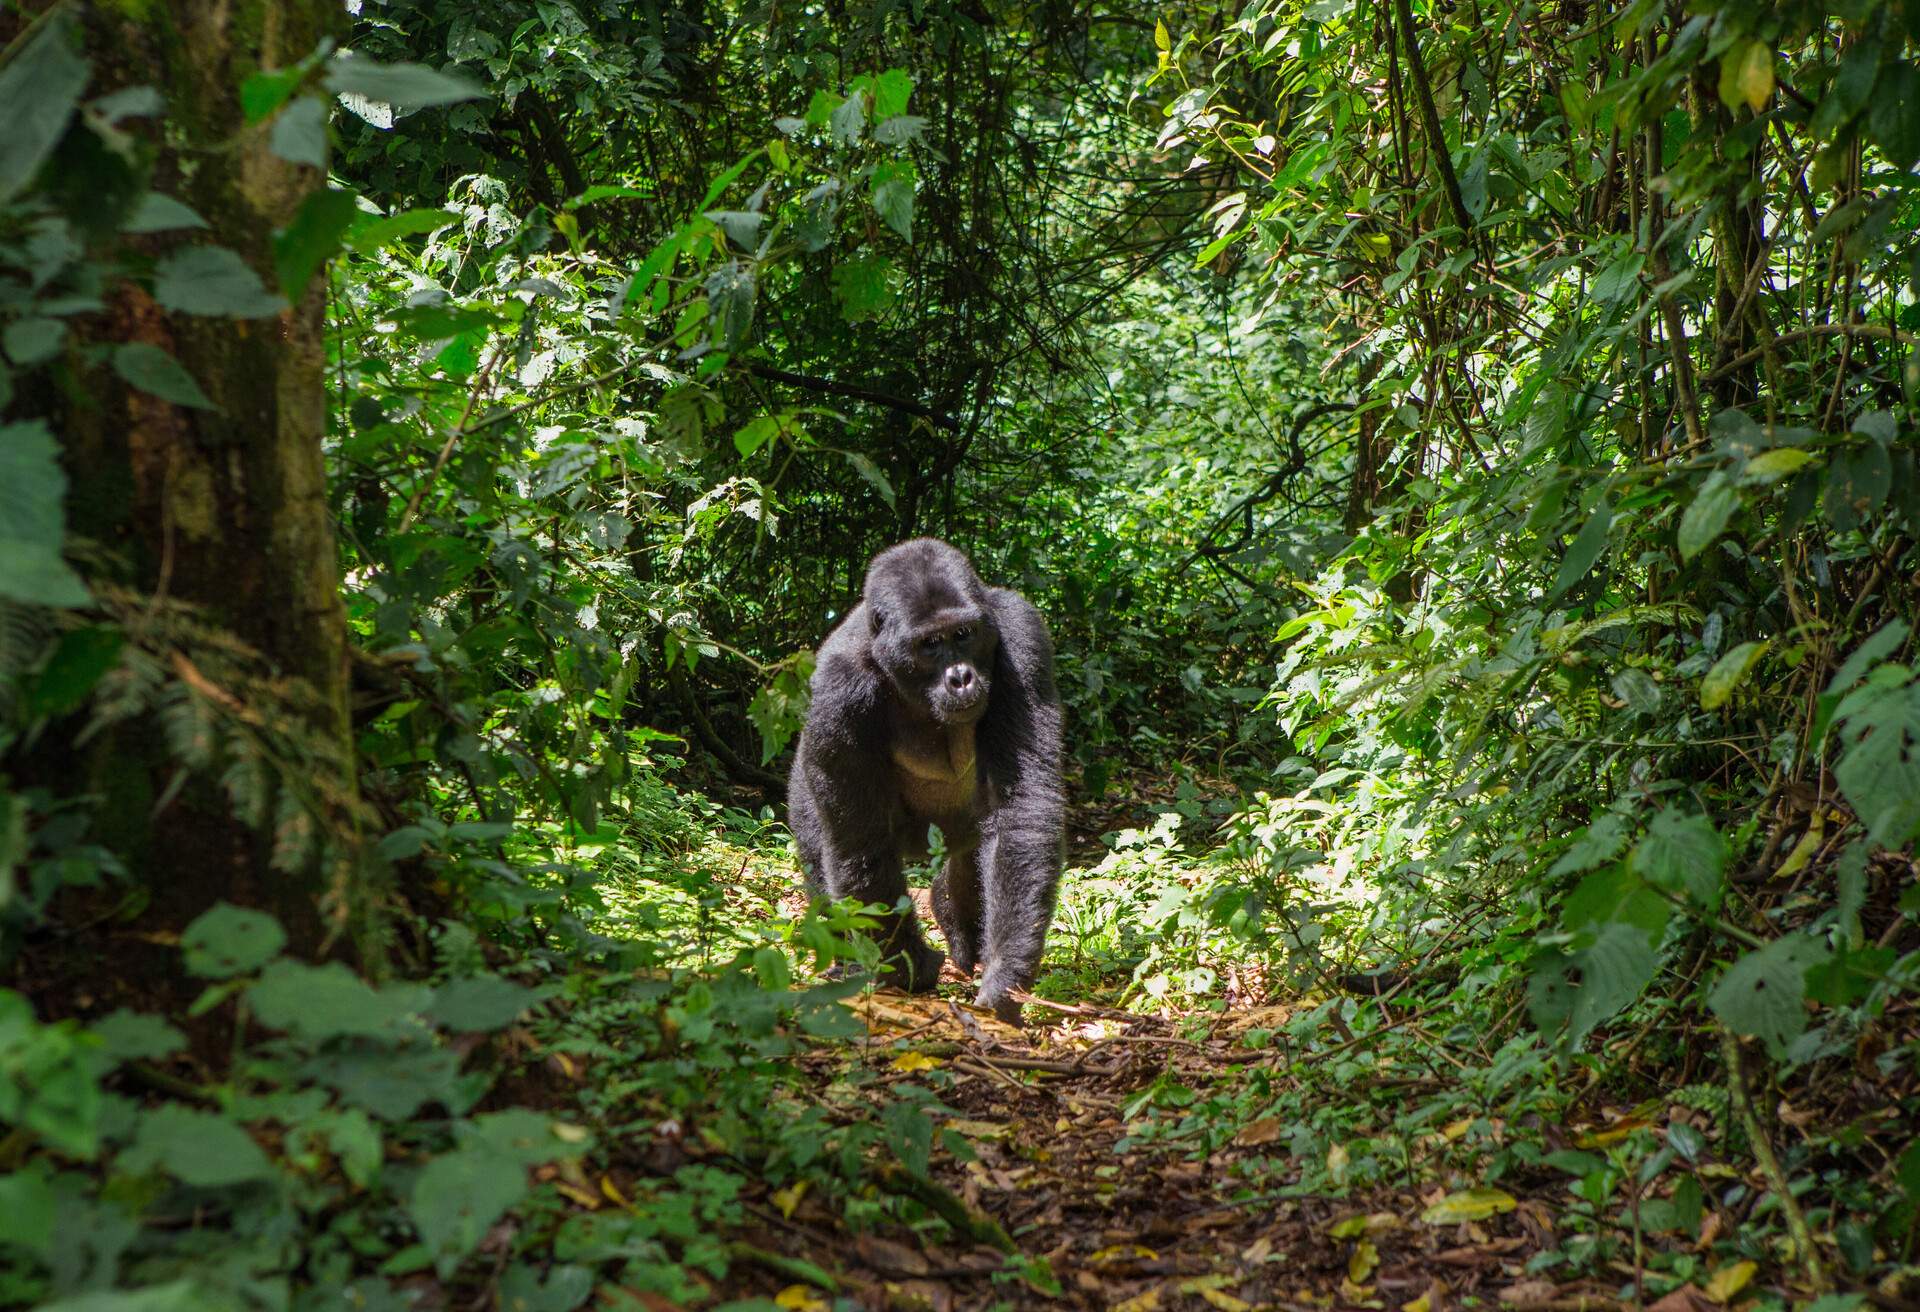 Mountain gorillas in the rainforest in Uganda. Bwindi Impenetrable Forest National Park